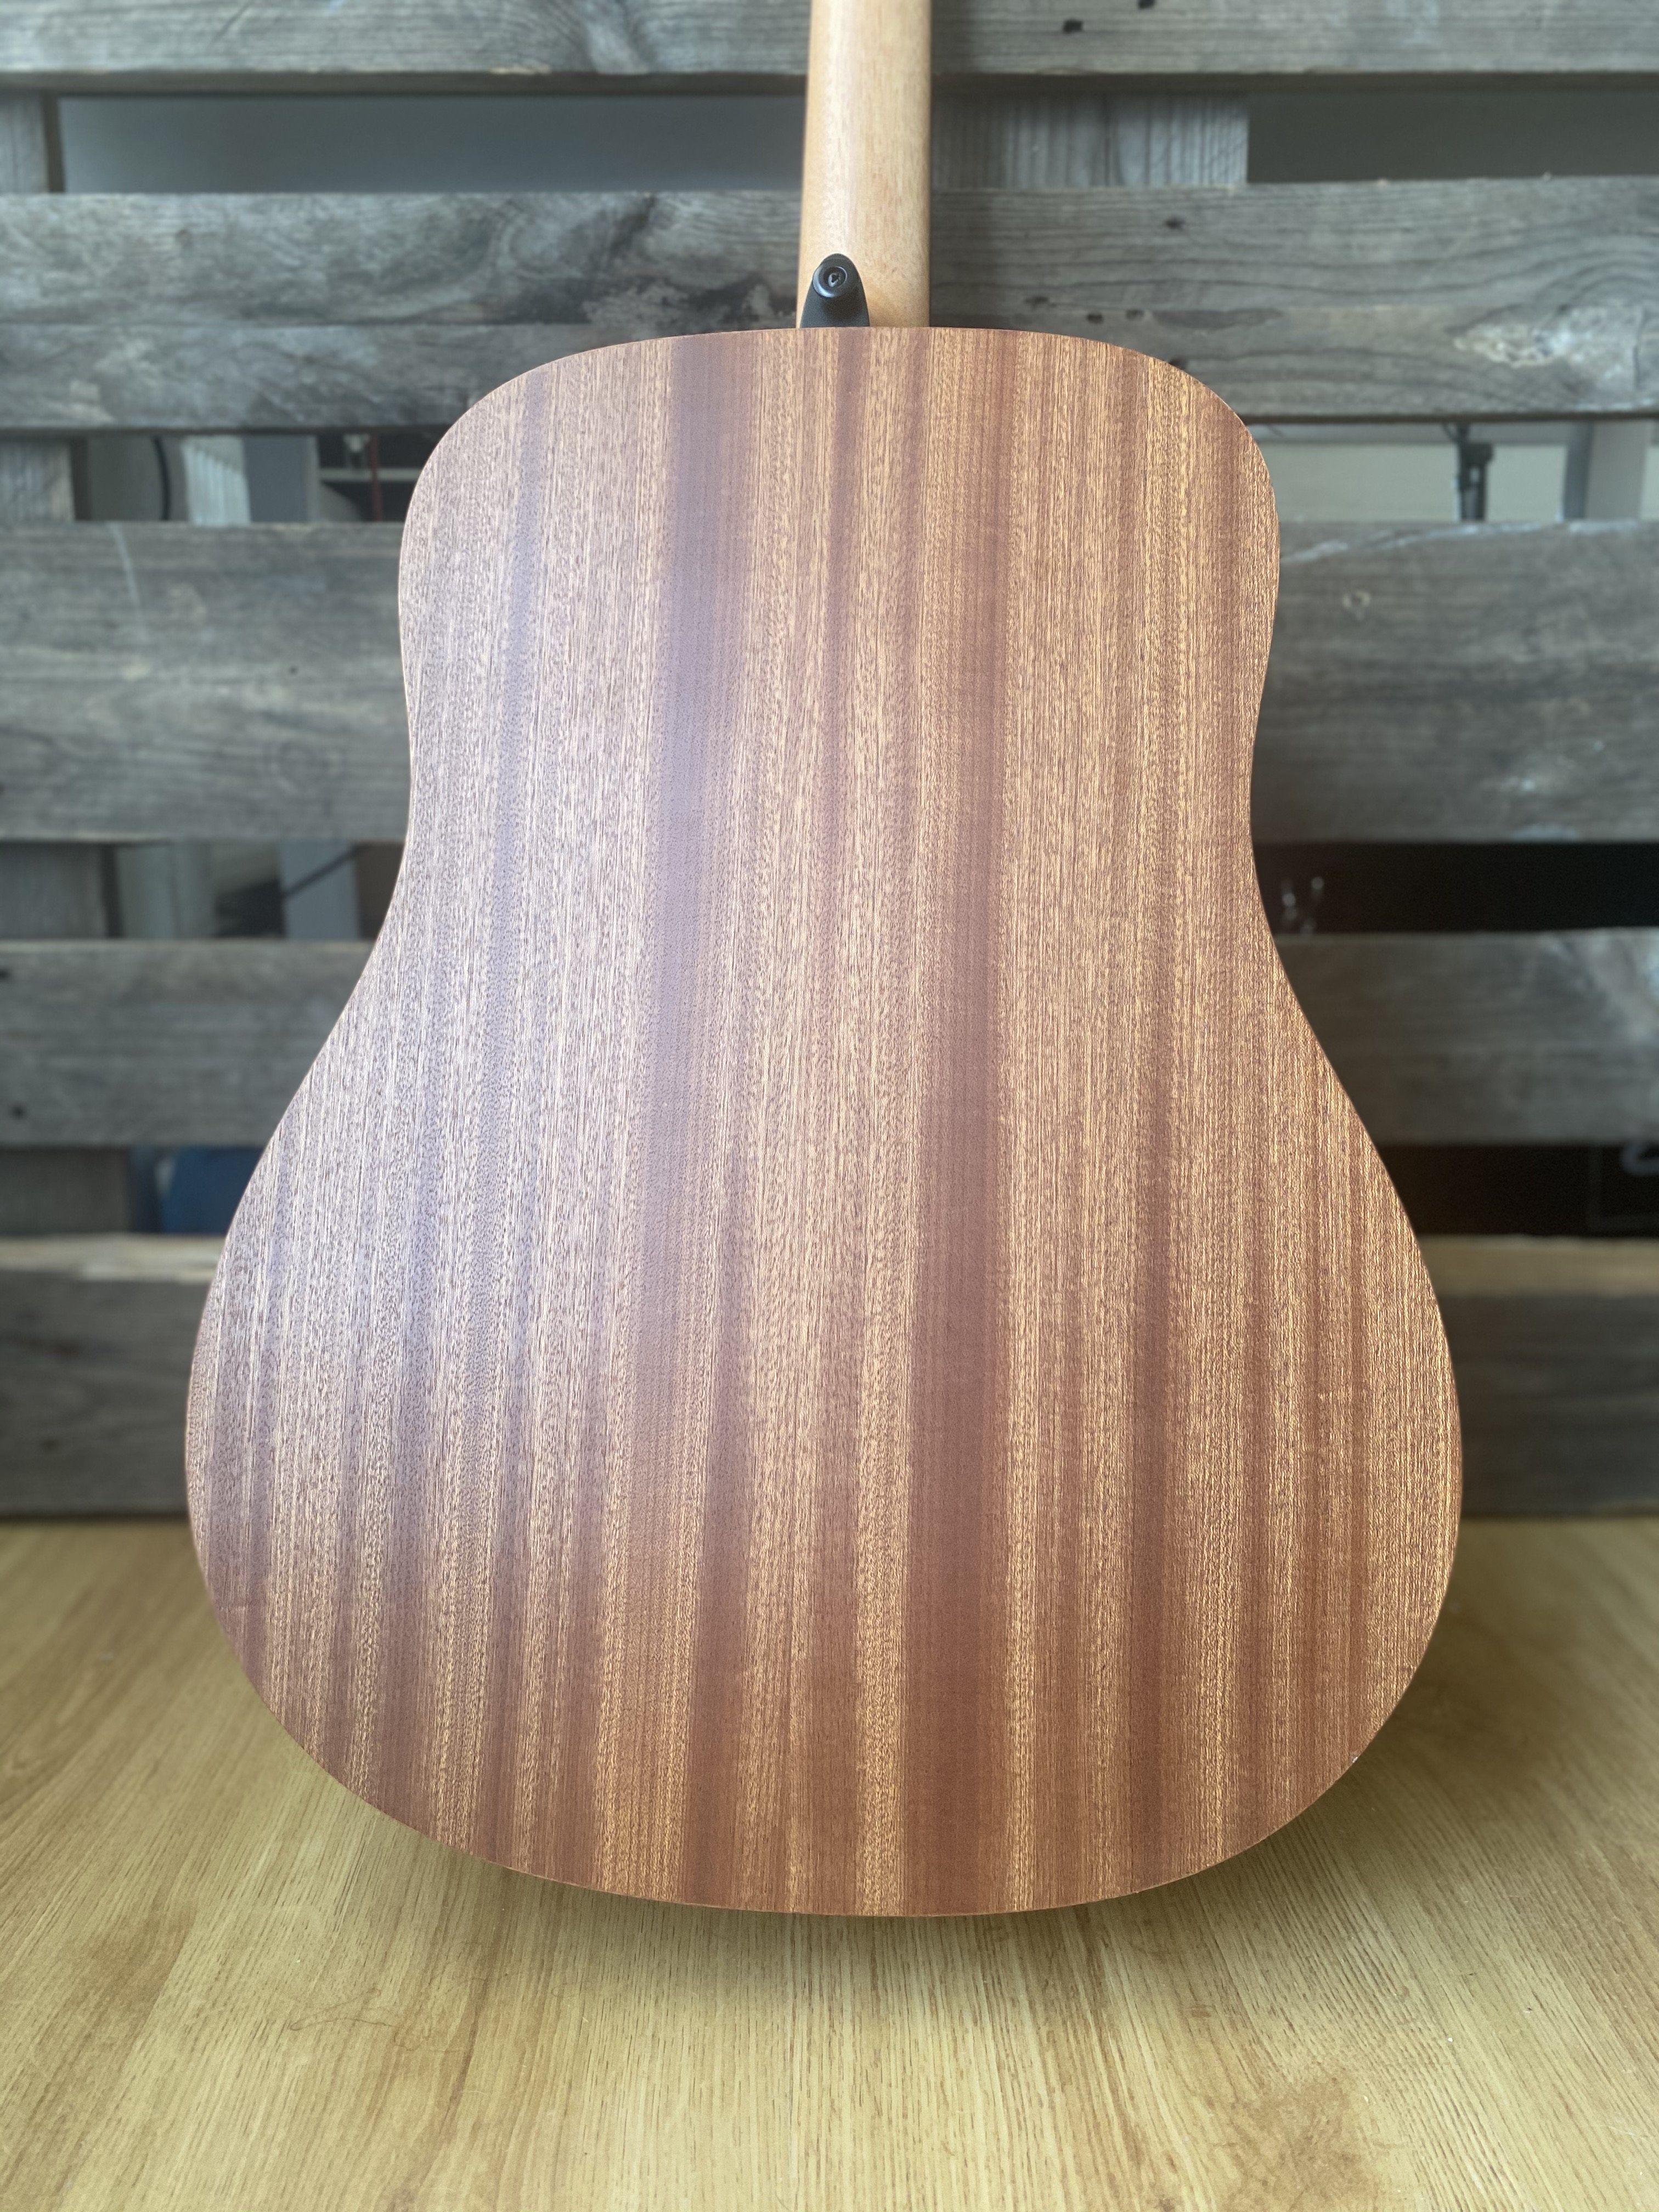 LAG TRAMONTANE 70 T70D  Dreadnought Top Personal Acoustic Recommendation, Acoustic Guitar for sale at Richards Guitars.